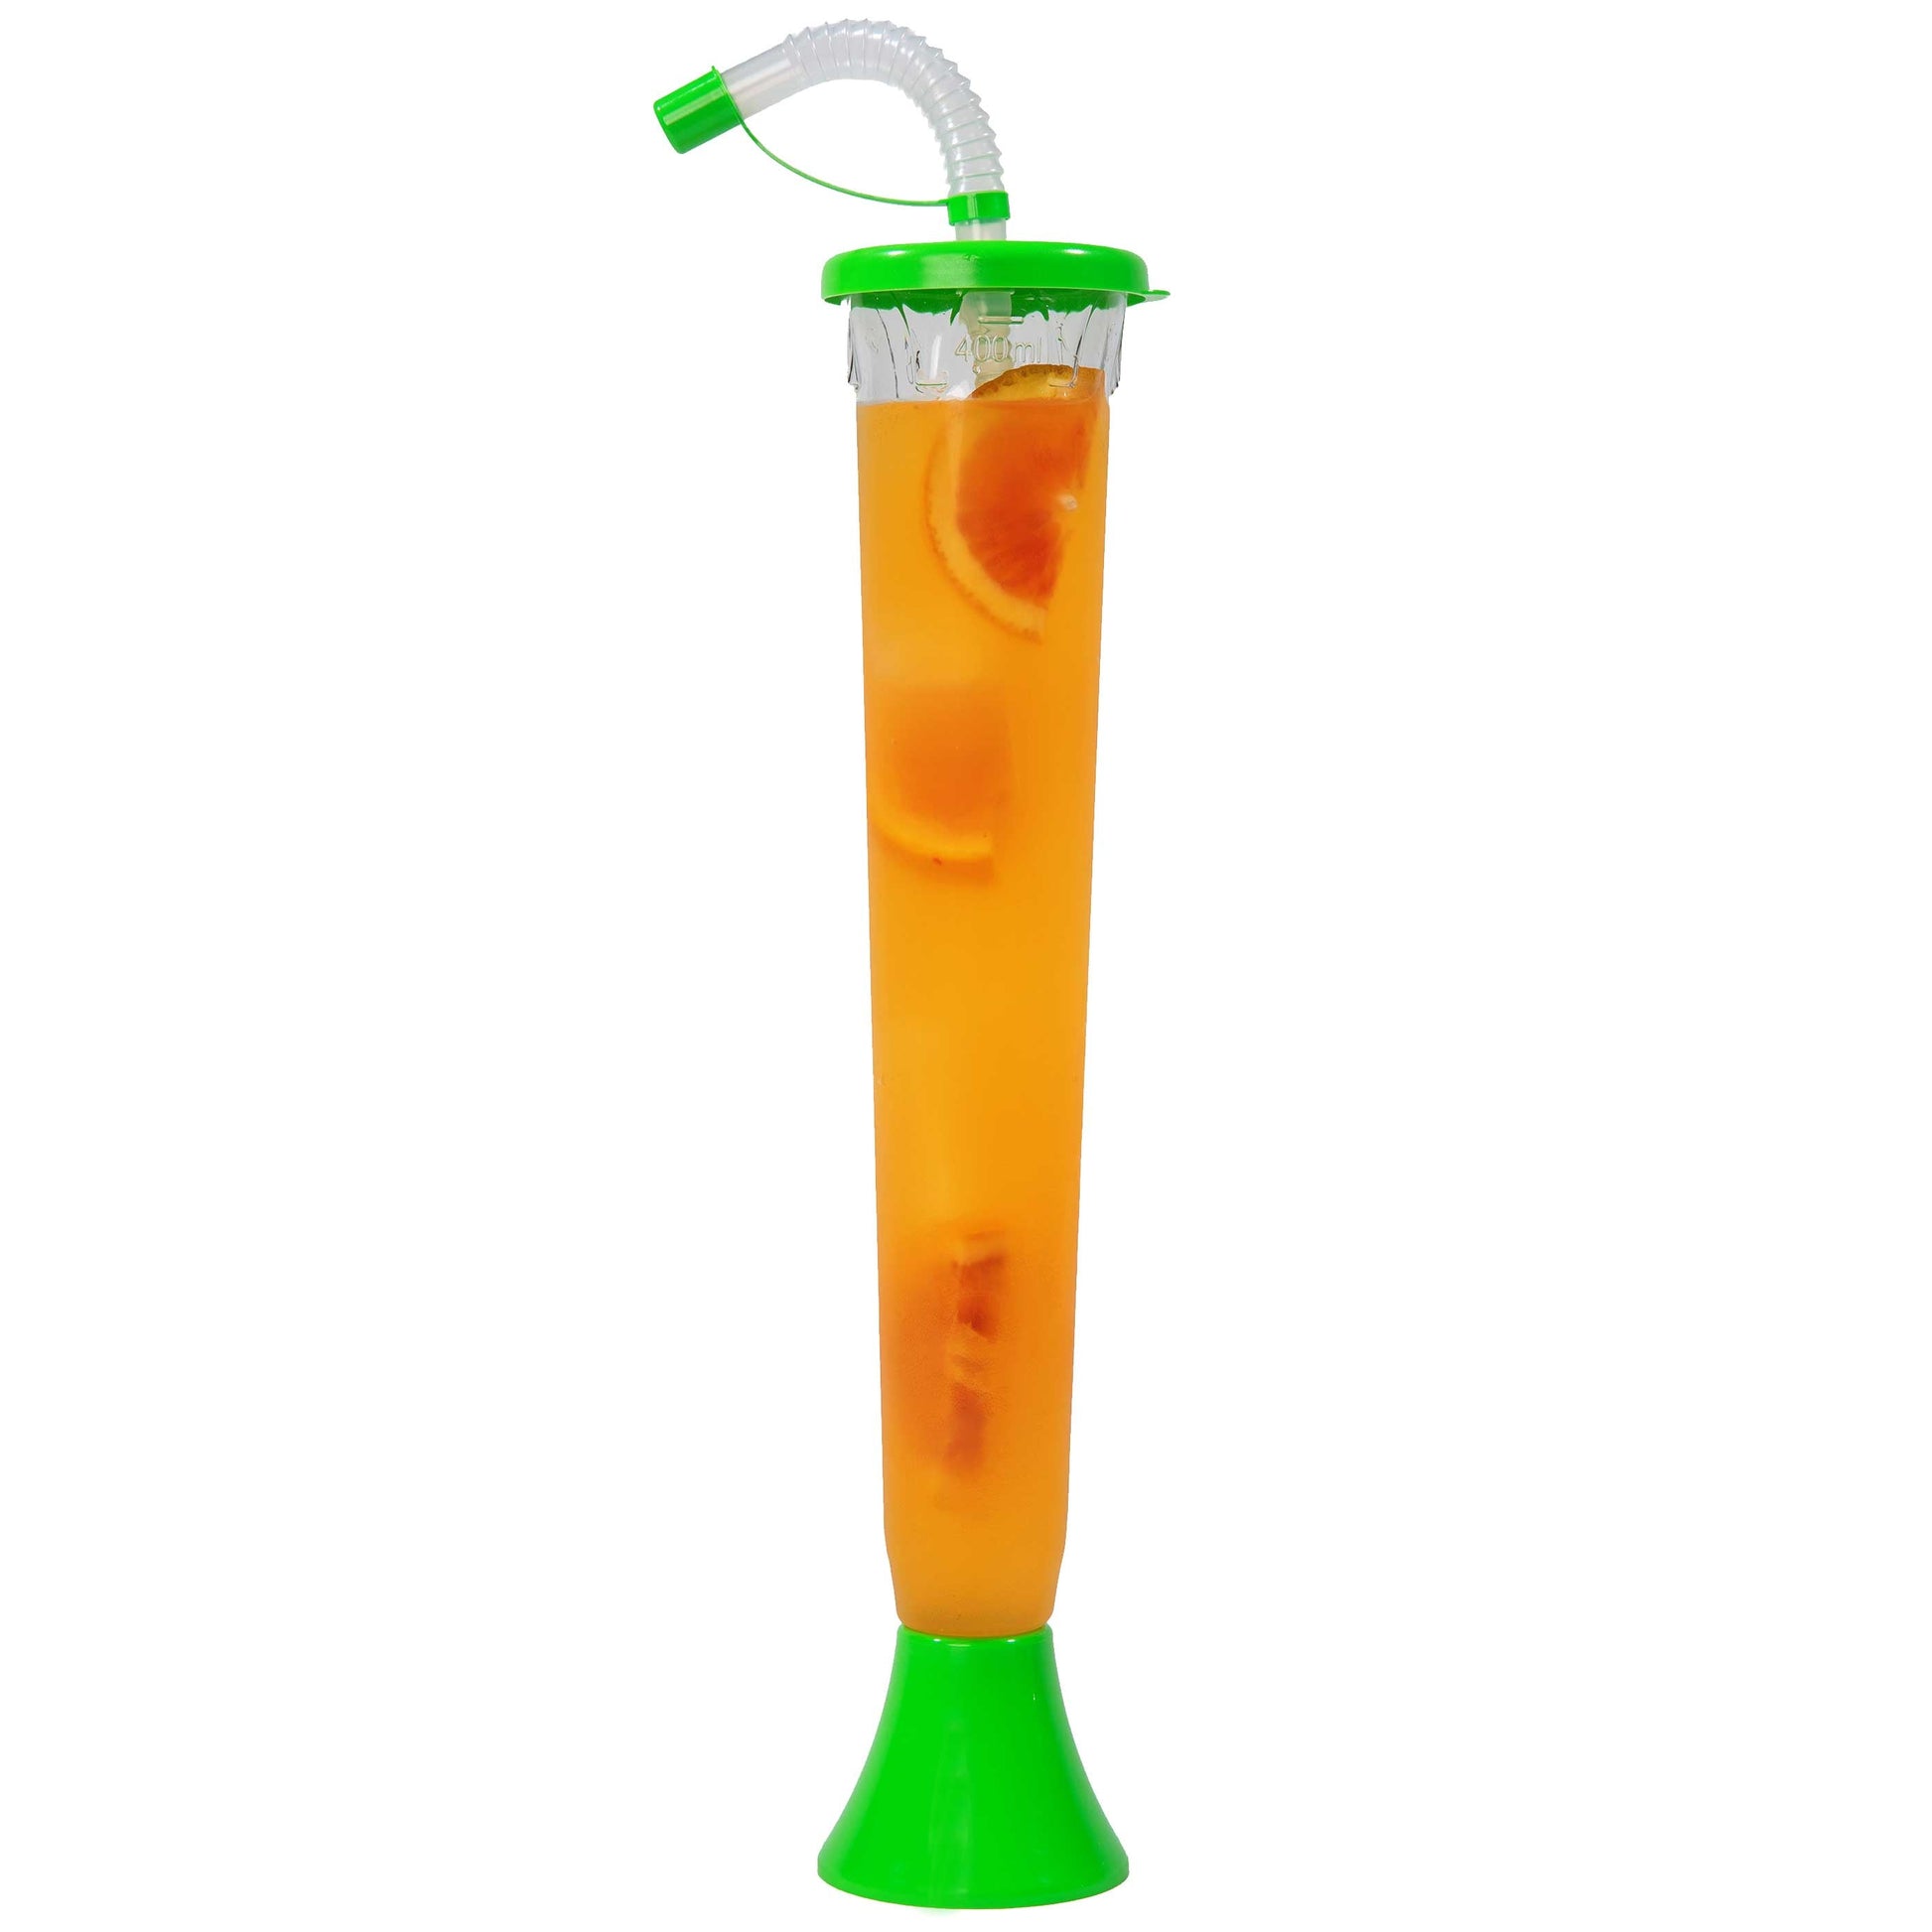 Sweet World USA Yard Cups (54 or 108 Cups) Yard Cups with LIME Lids and Straws - 14oz - for Margaritas and Frozen Drinks cups with lids and straws